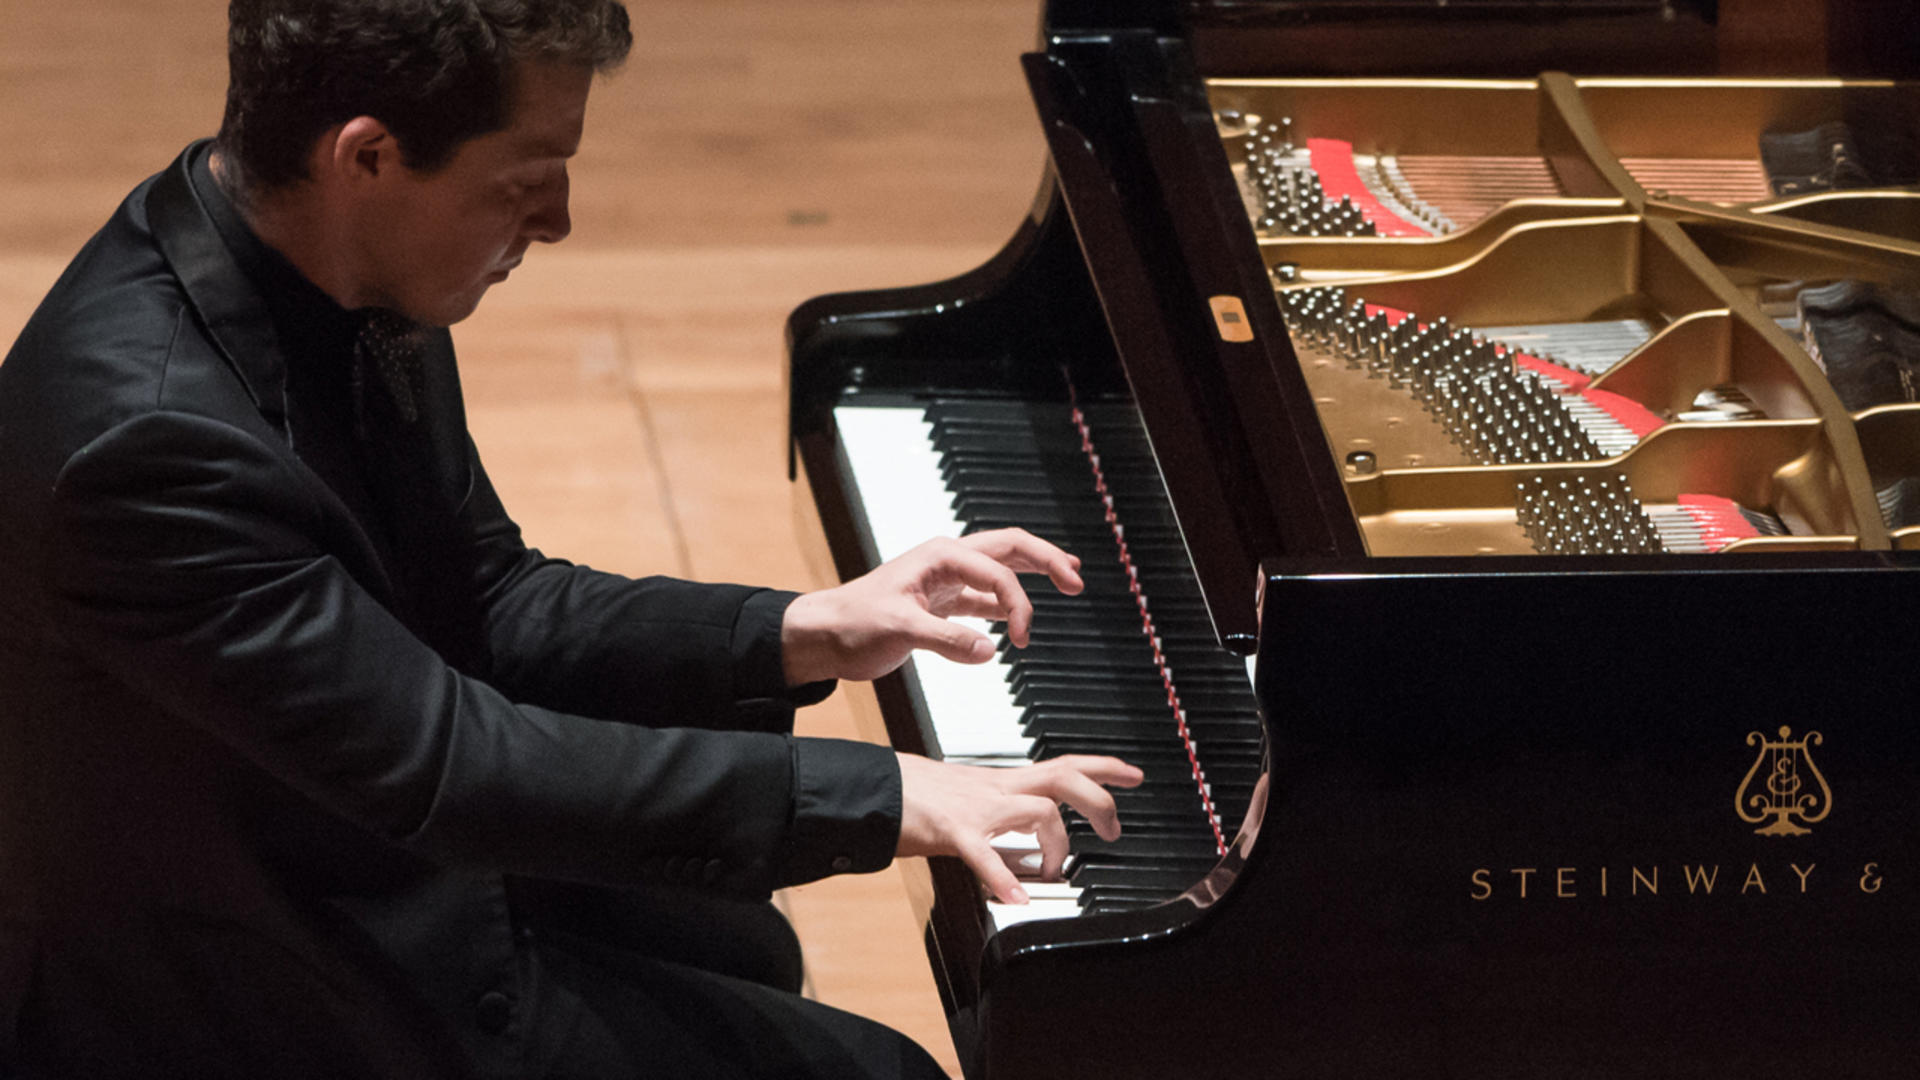 Juilliard Wednesdays at One: Music for Piano, at Lincoln Center